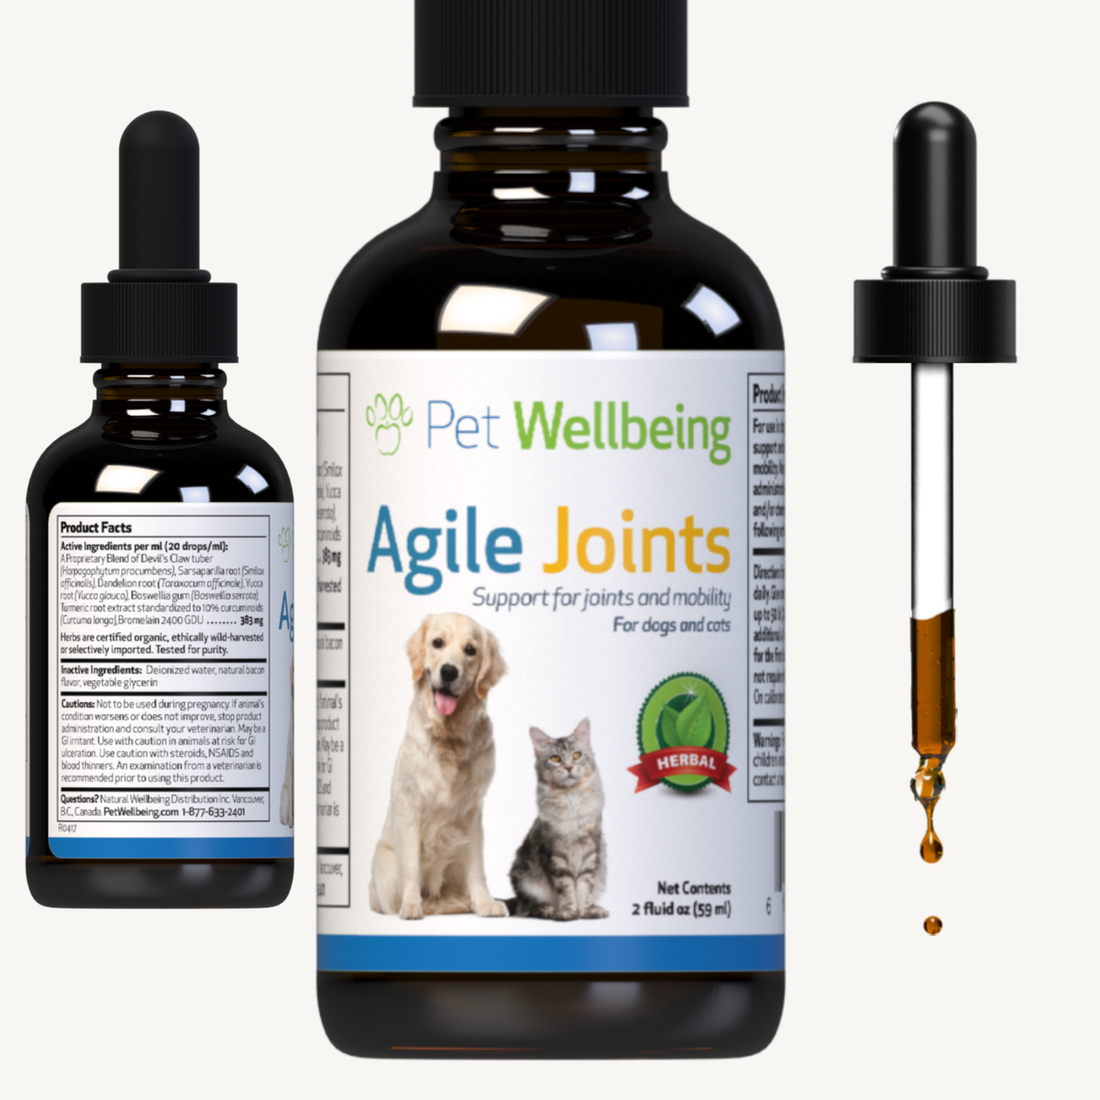 Pet Wellbeing - Agile Joints for Cats